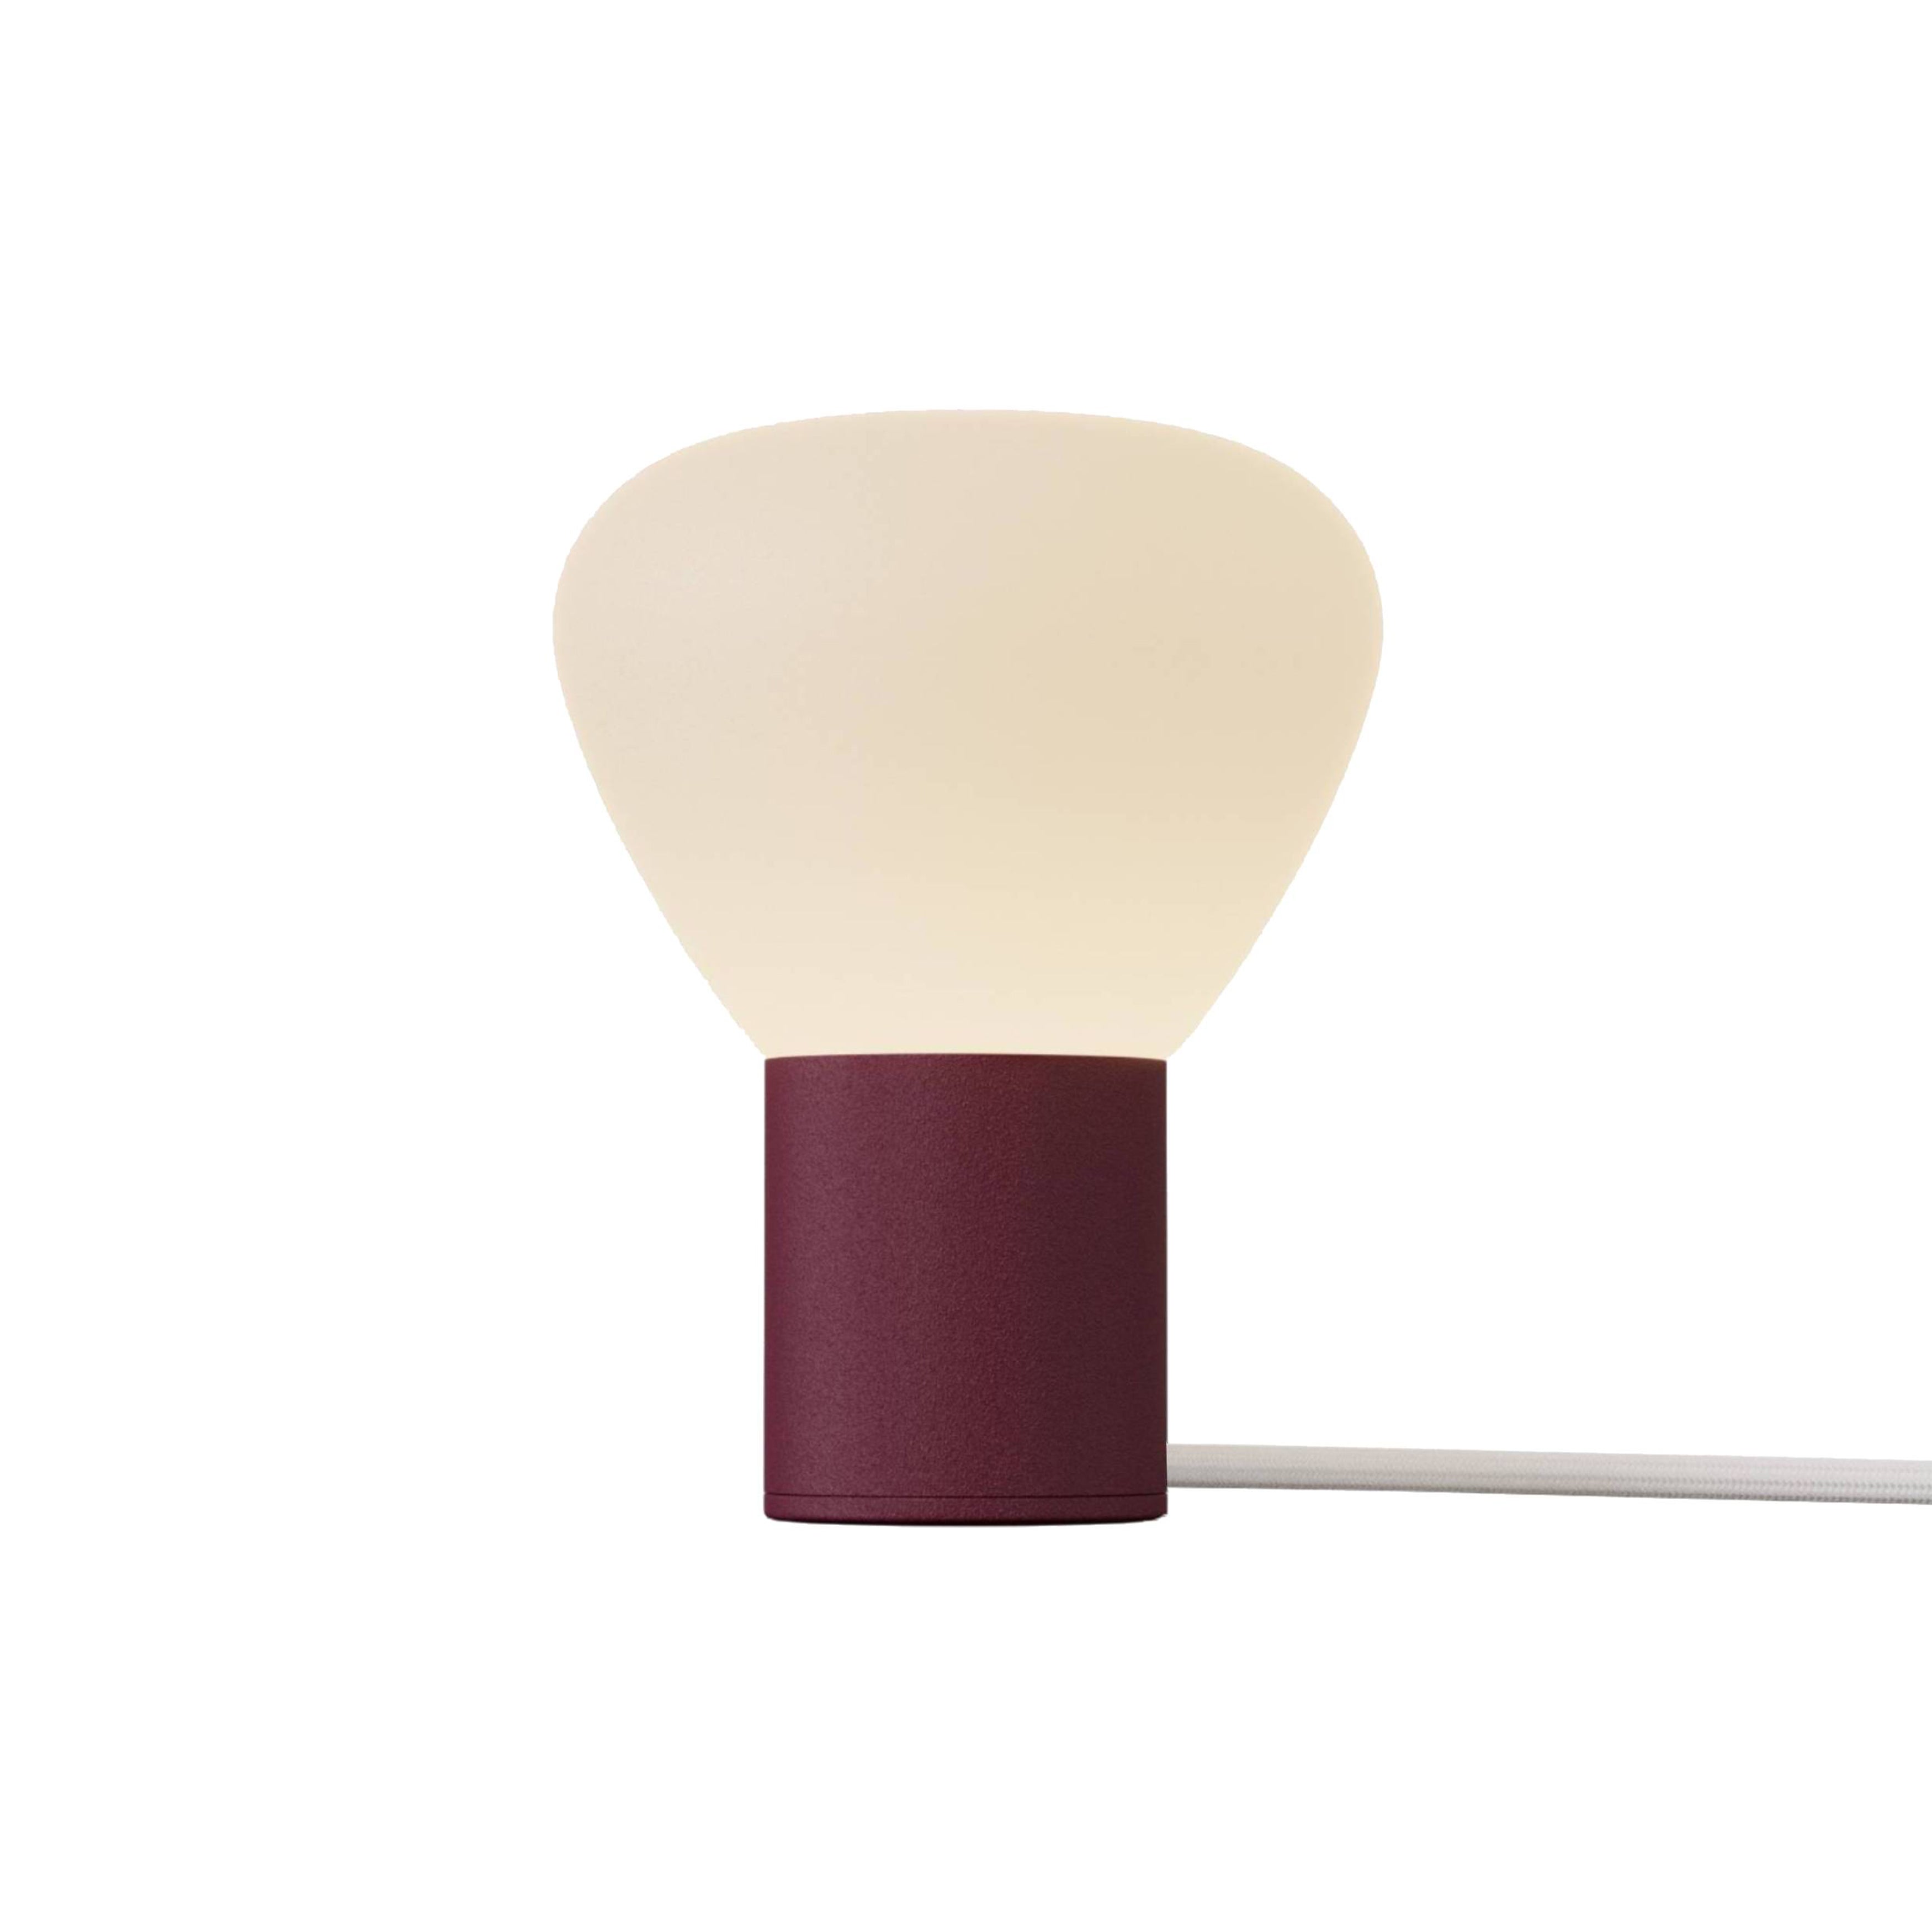 Parc 01 Table Lamp: Handswitch +  Burgundy + White